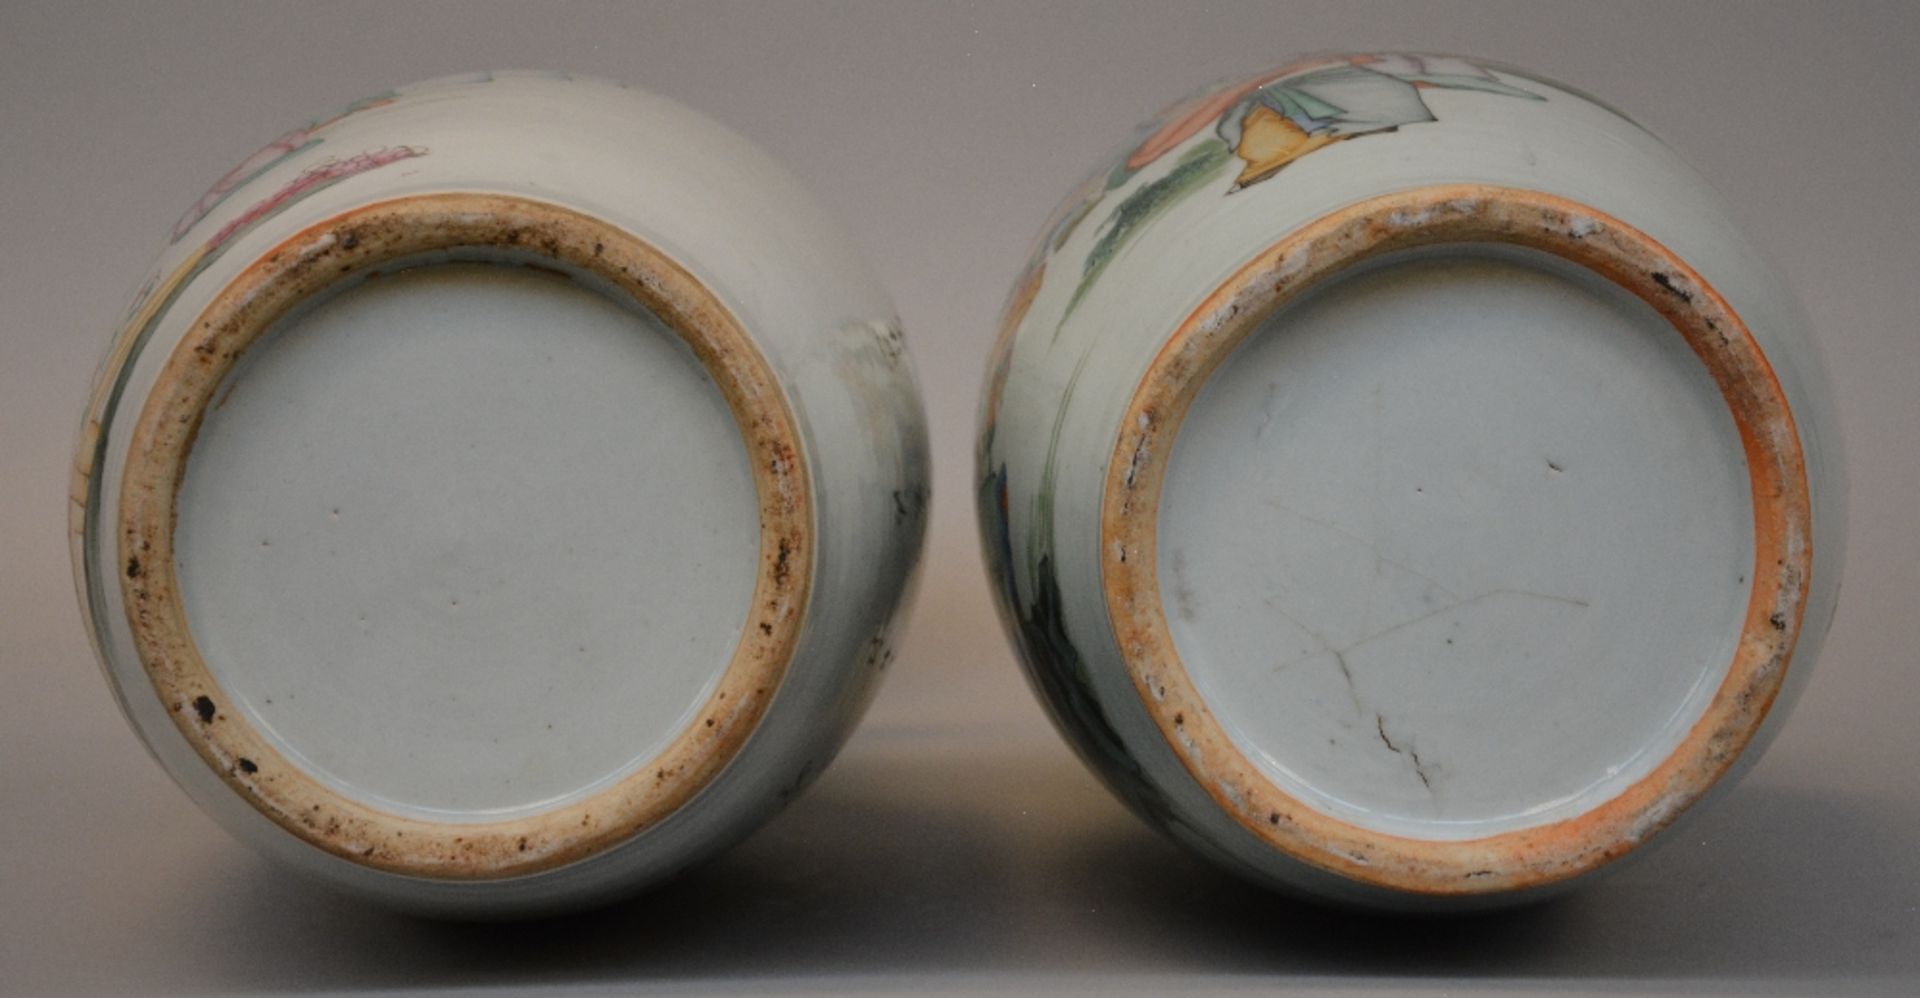 Two Chinese polychrome decorated vases depicting sages, H 55,5 - 58,5 cm (one vase with crack on the - Image 6 of 7